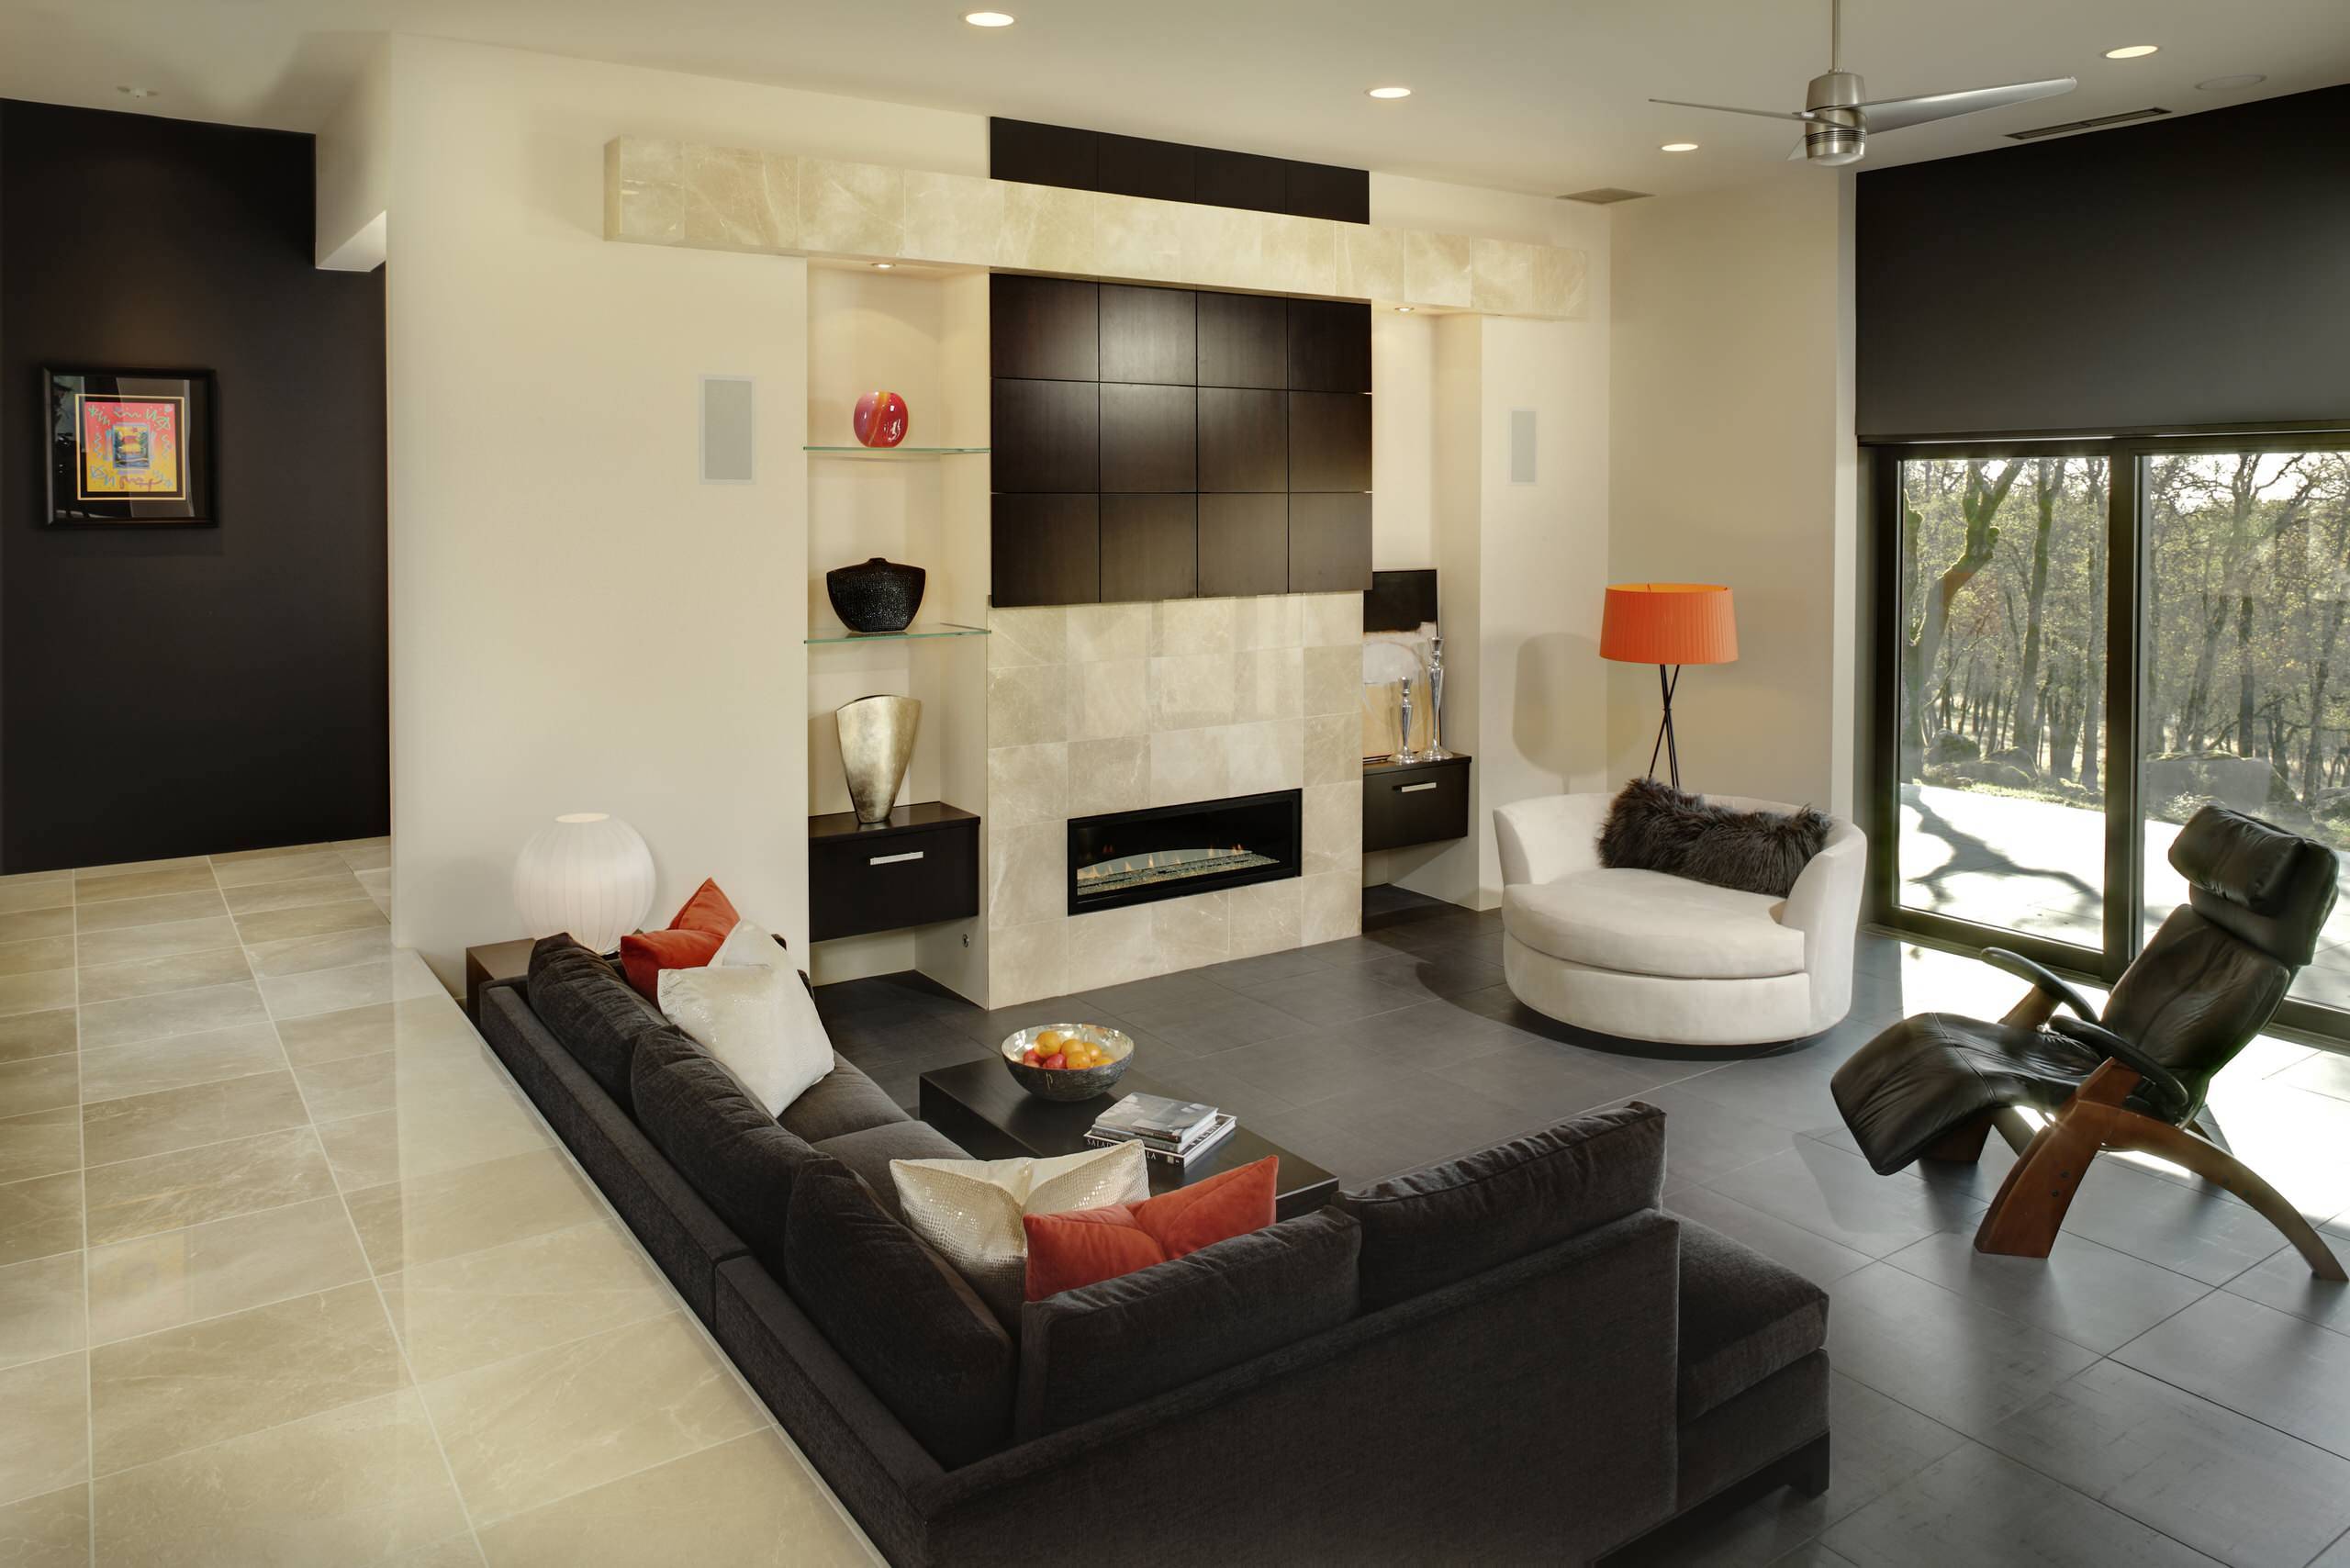 Sunken designs makes the living room feel more spacious (from Houzz)